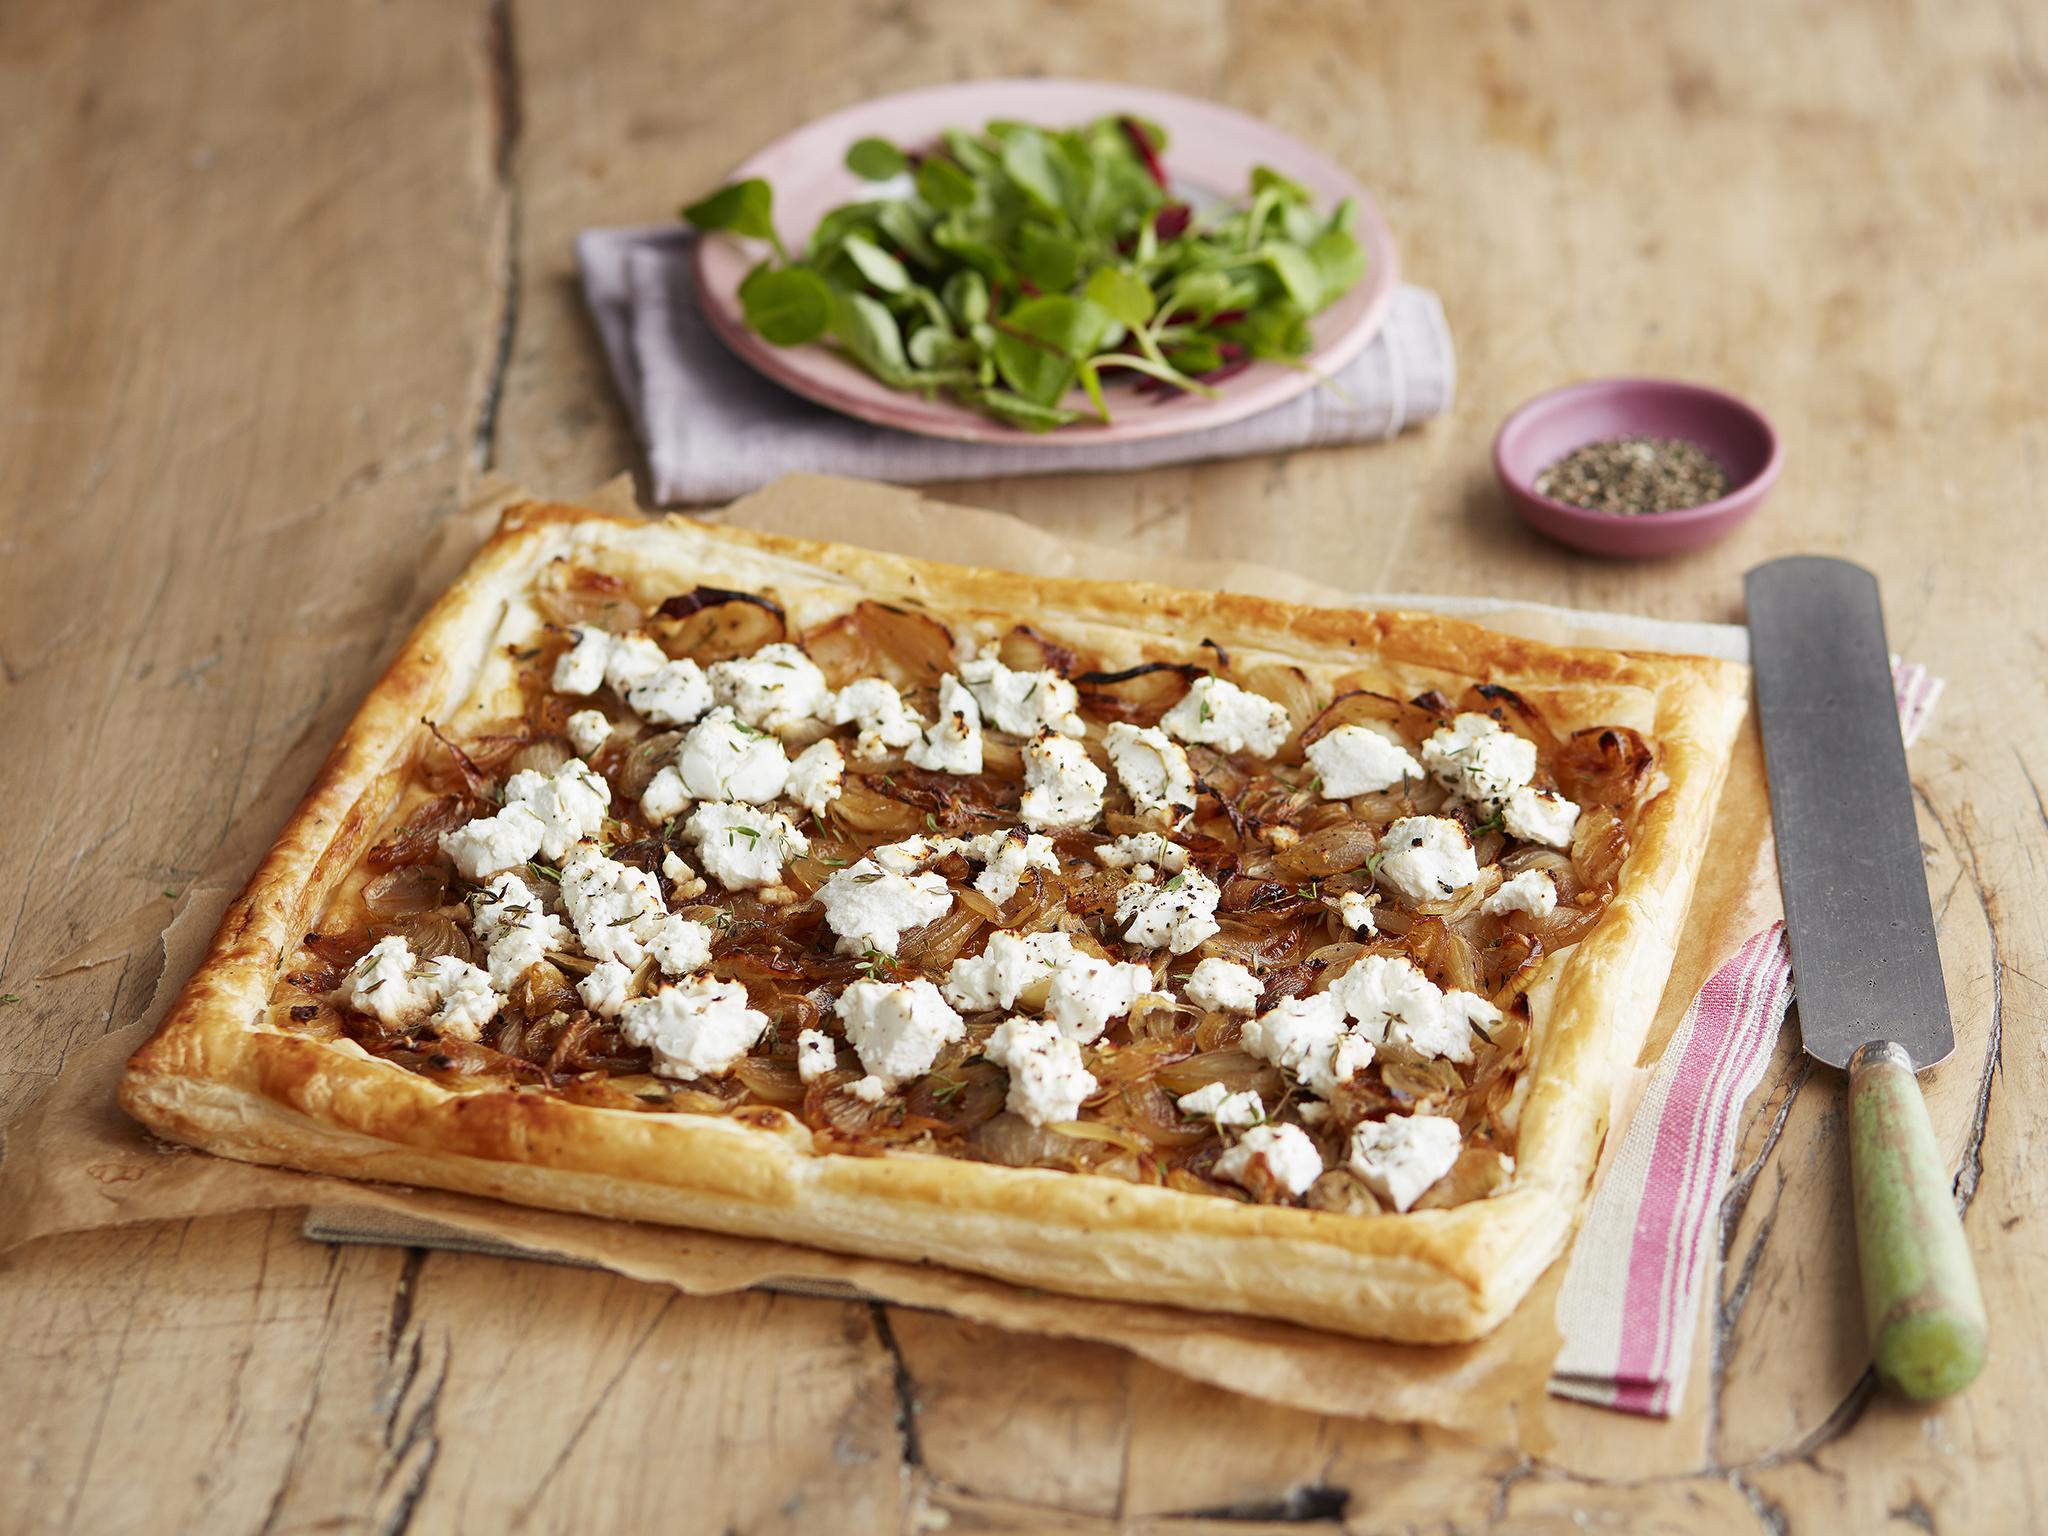 This goat’s cheese and caramelised onion tart takes the pain out of caramelising onions